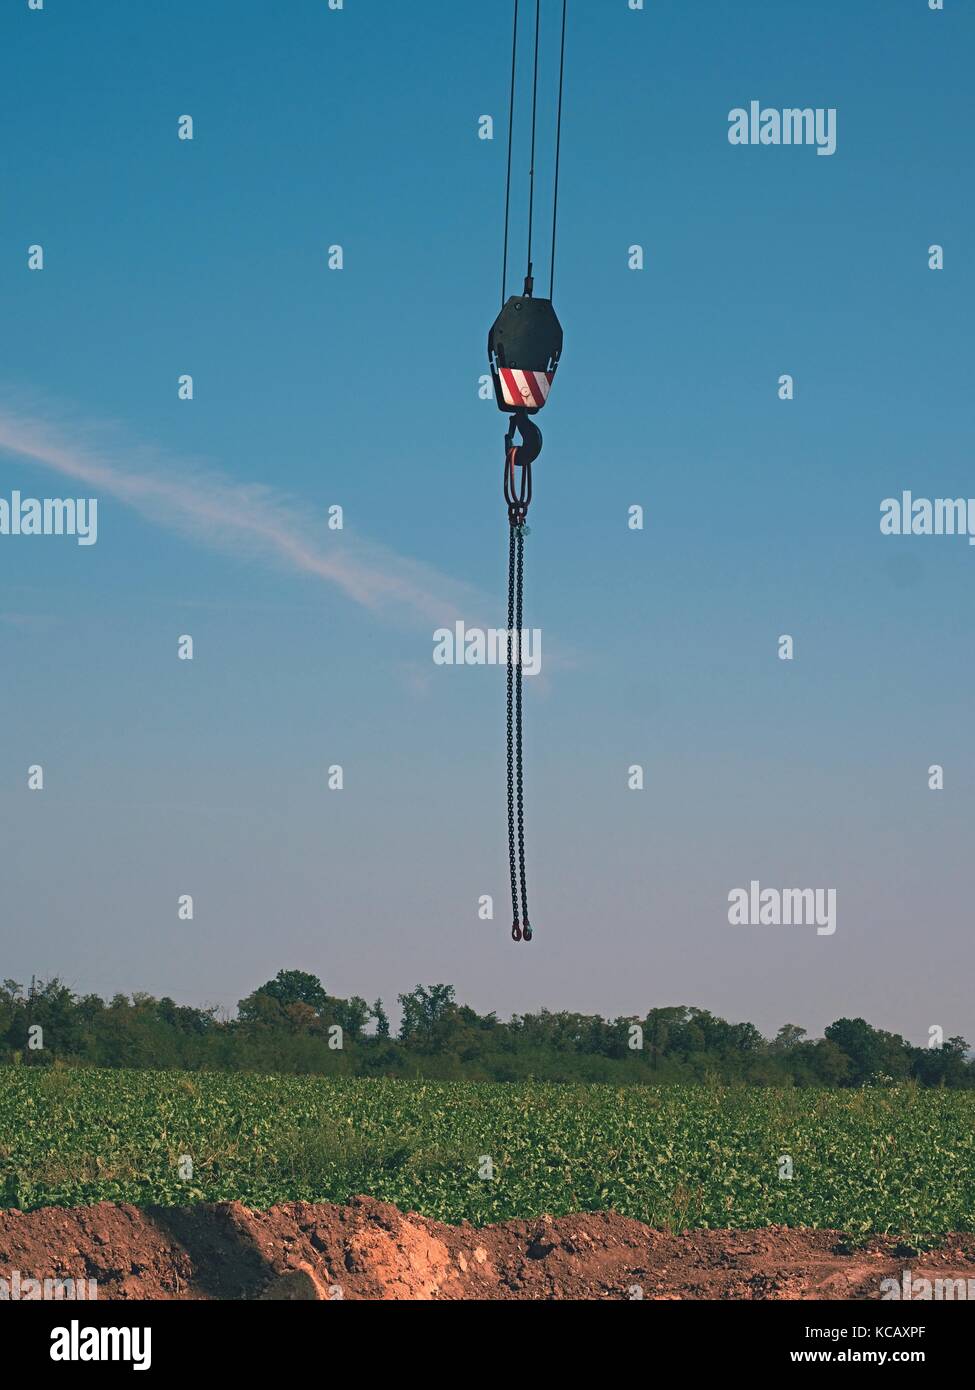 Empty hook of a large crane in outdoor building action. Empty hol diged in the field, blue sky in backgrround Stock Photo